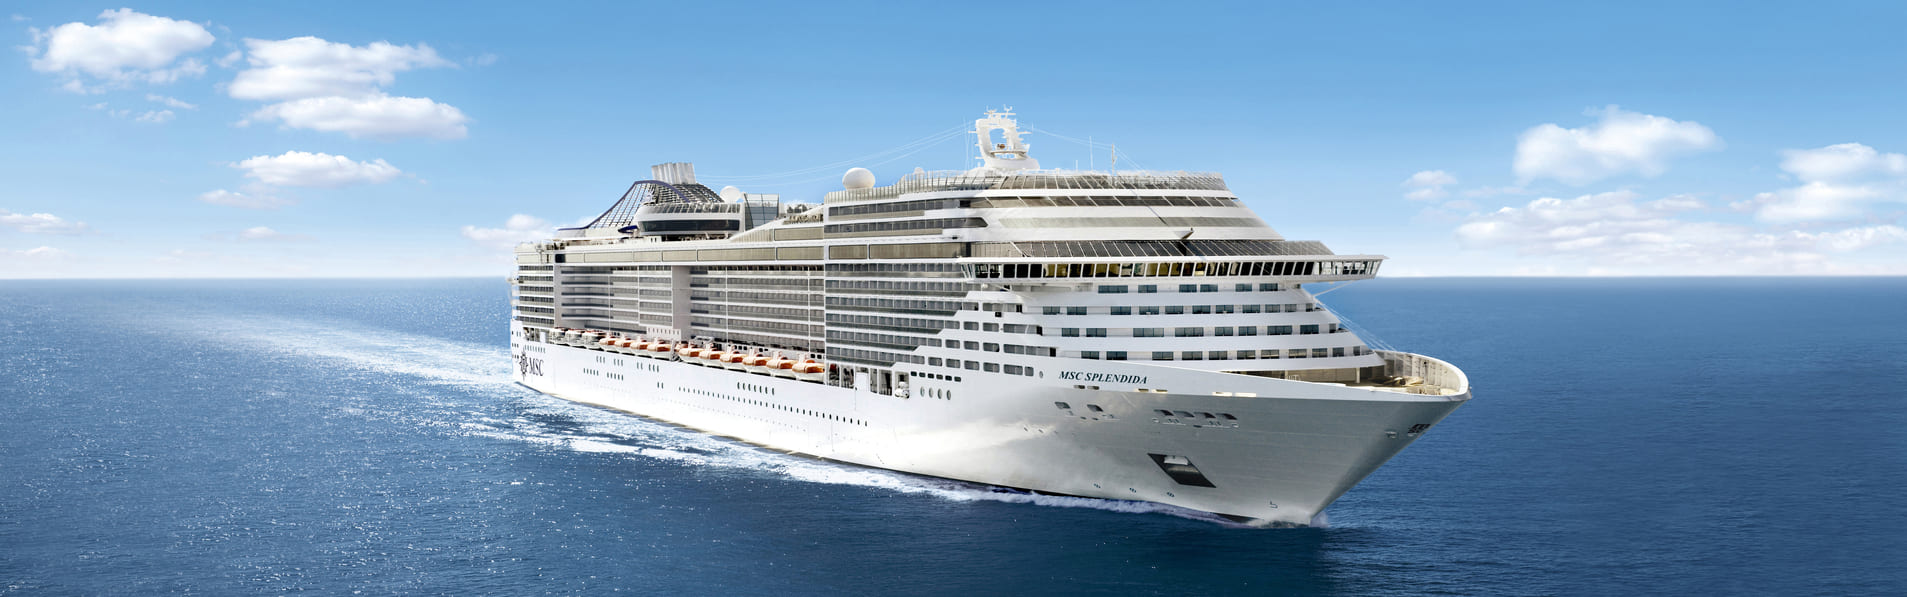 MSC Splendida in the open sea - MSC Cruises latest ship to come to South Africa 